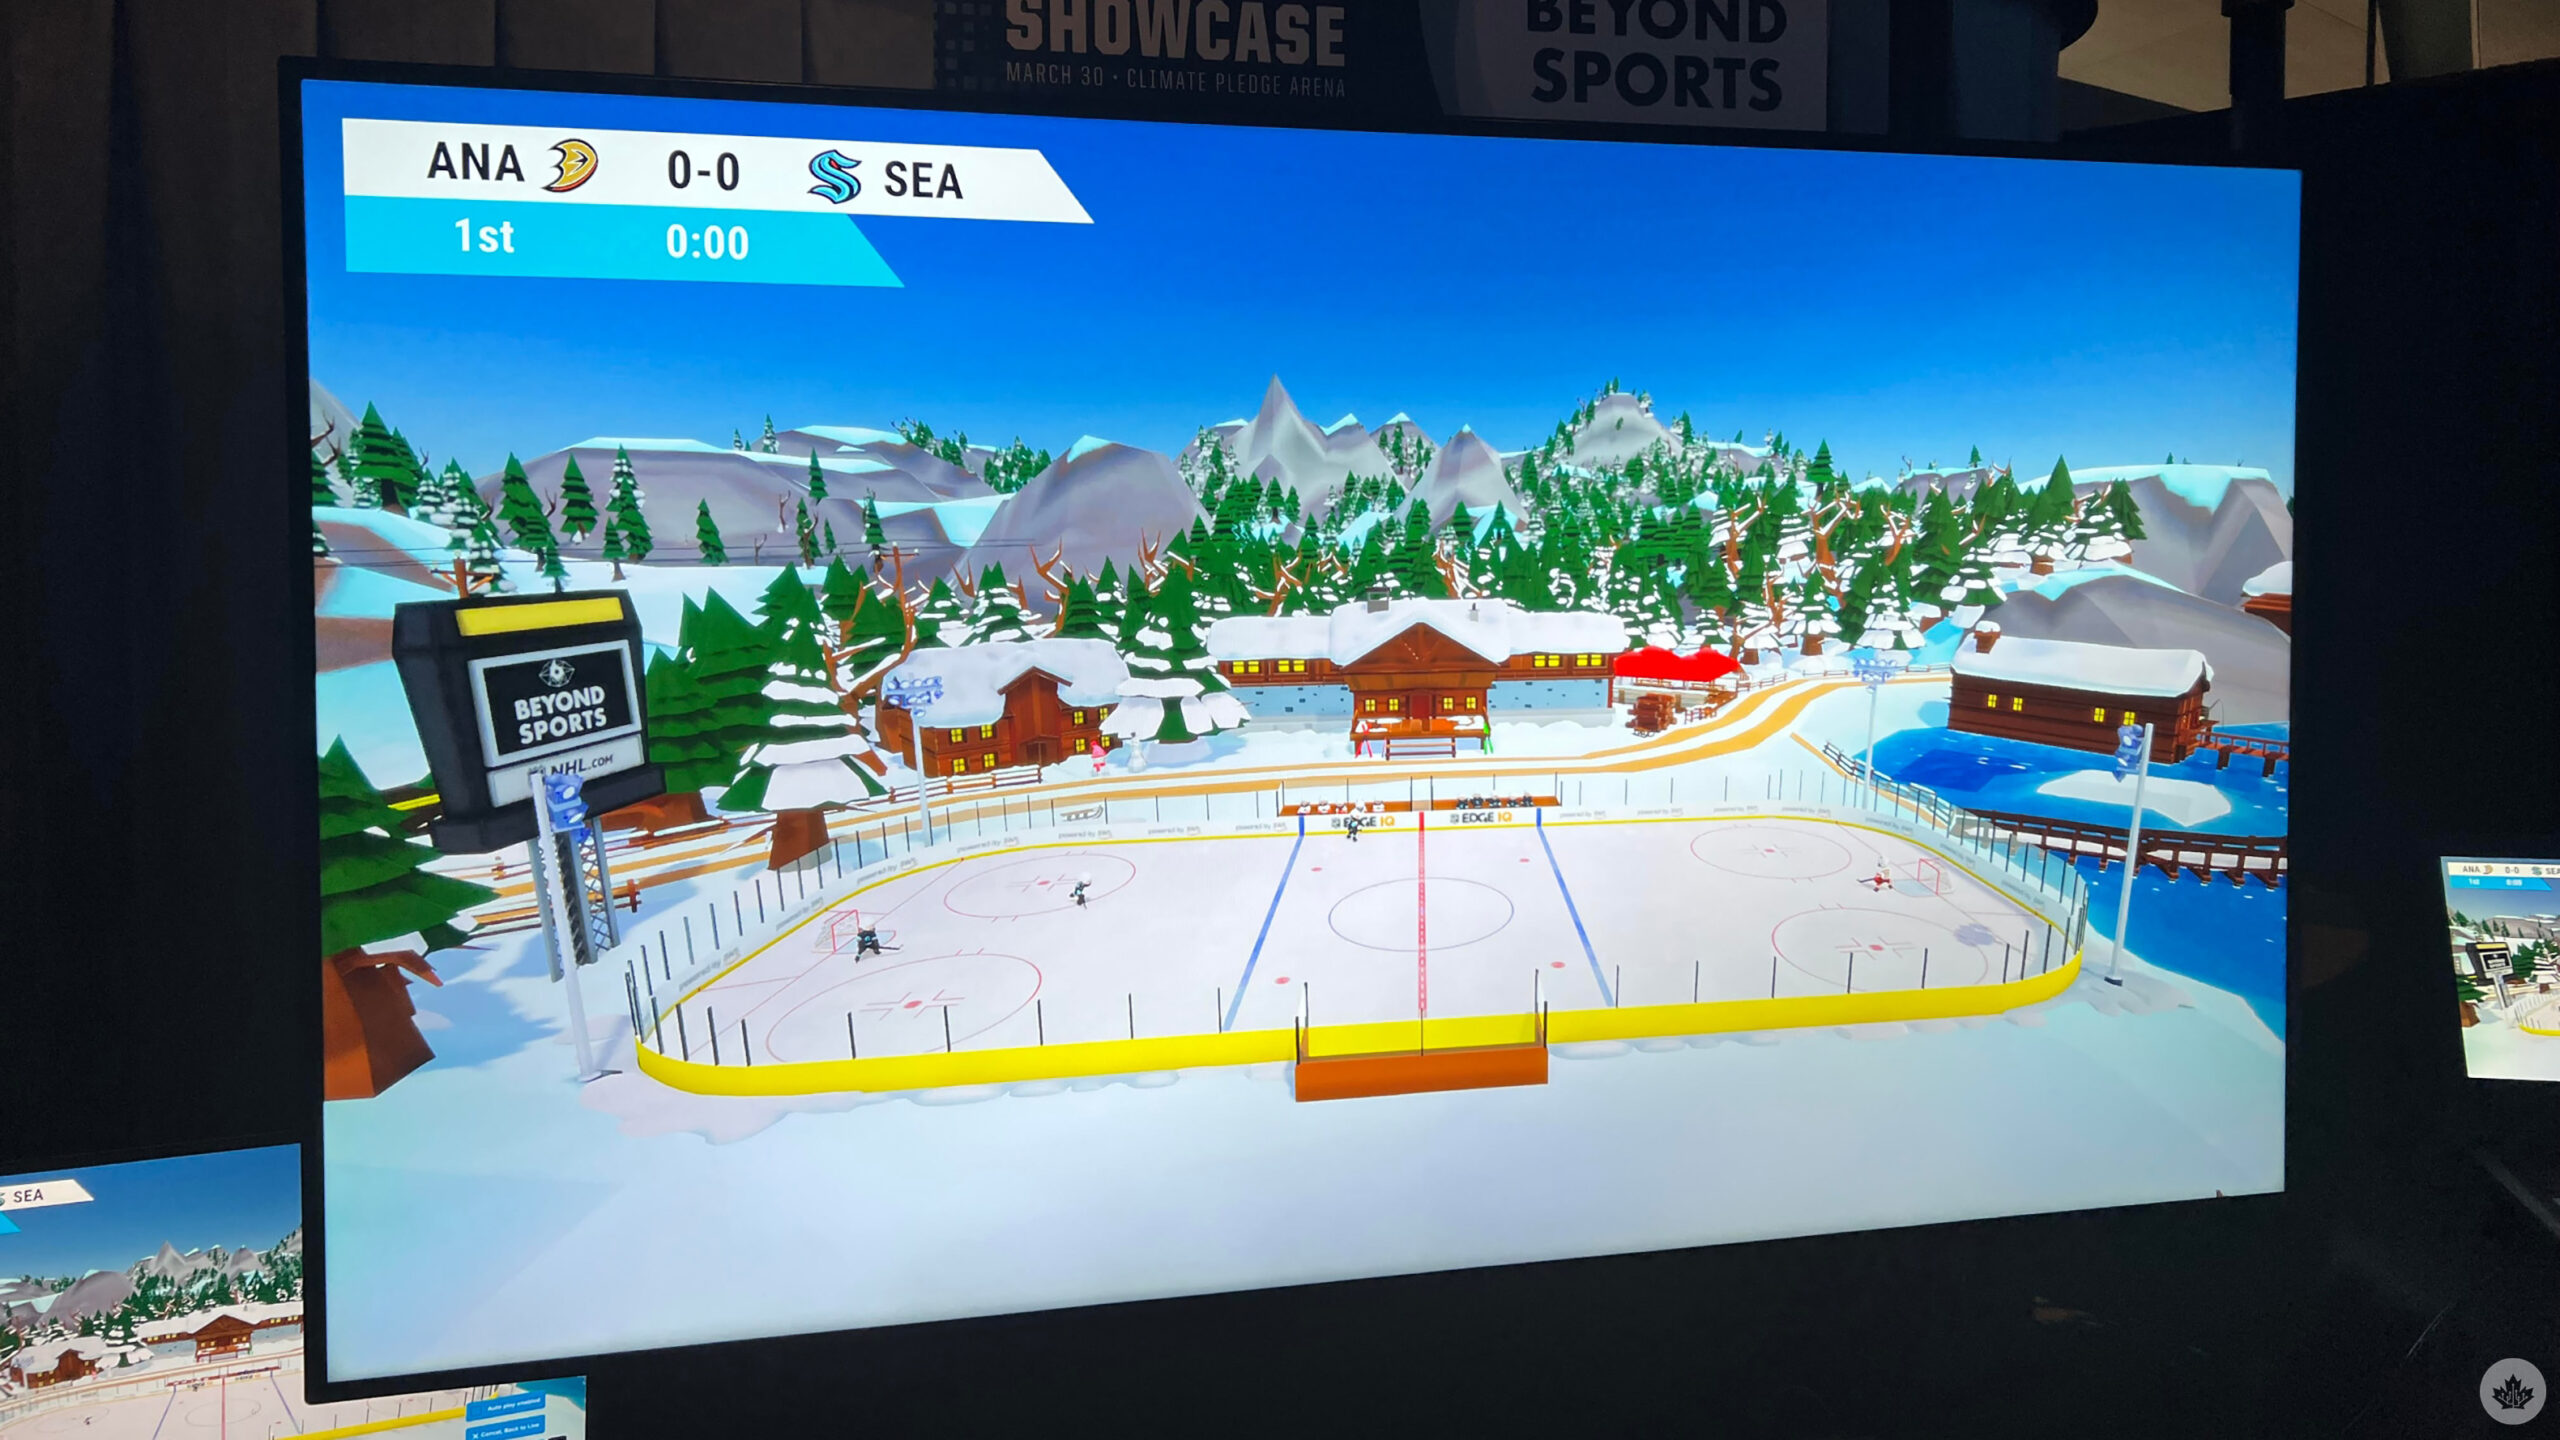 NHL Big City Greens Classic uses Beyond Sports tech for animated broadcast